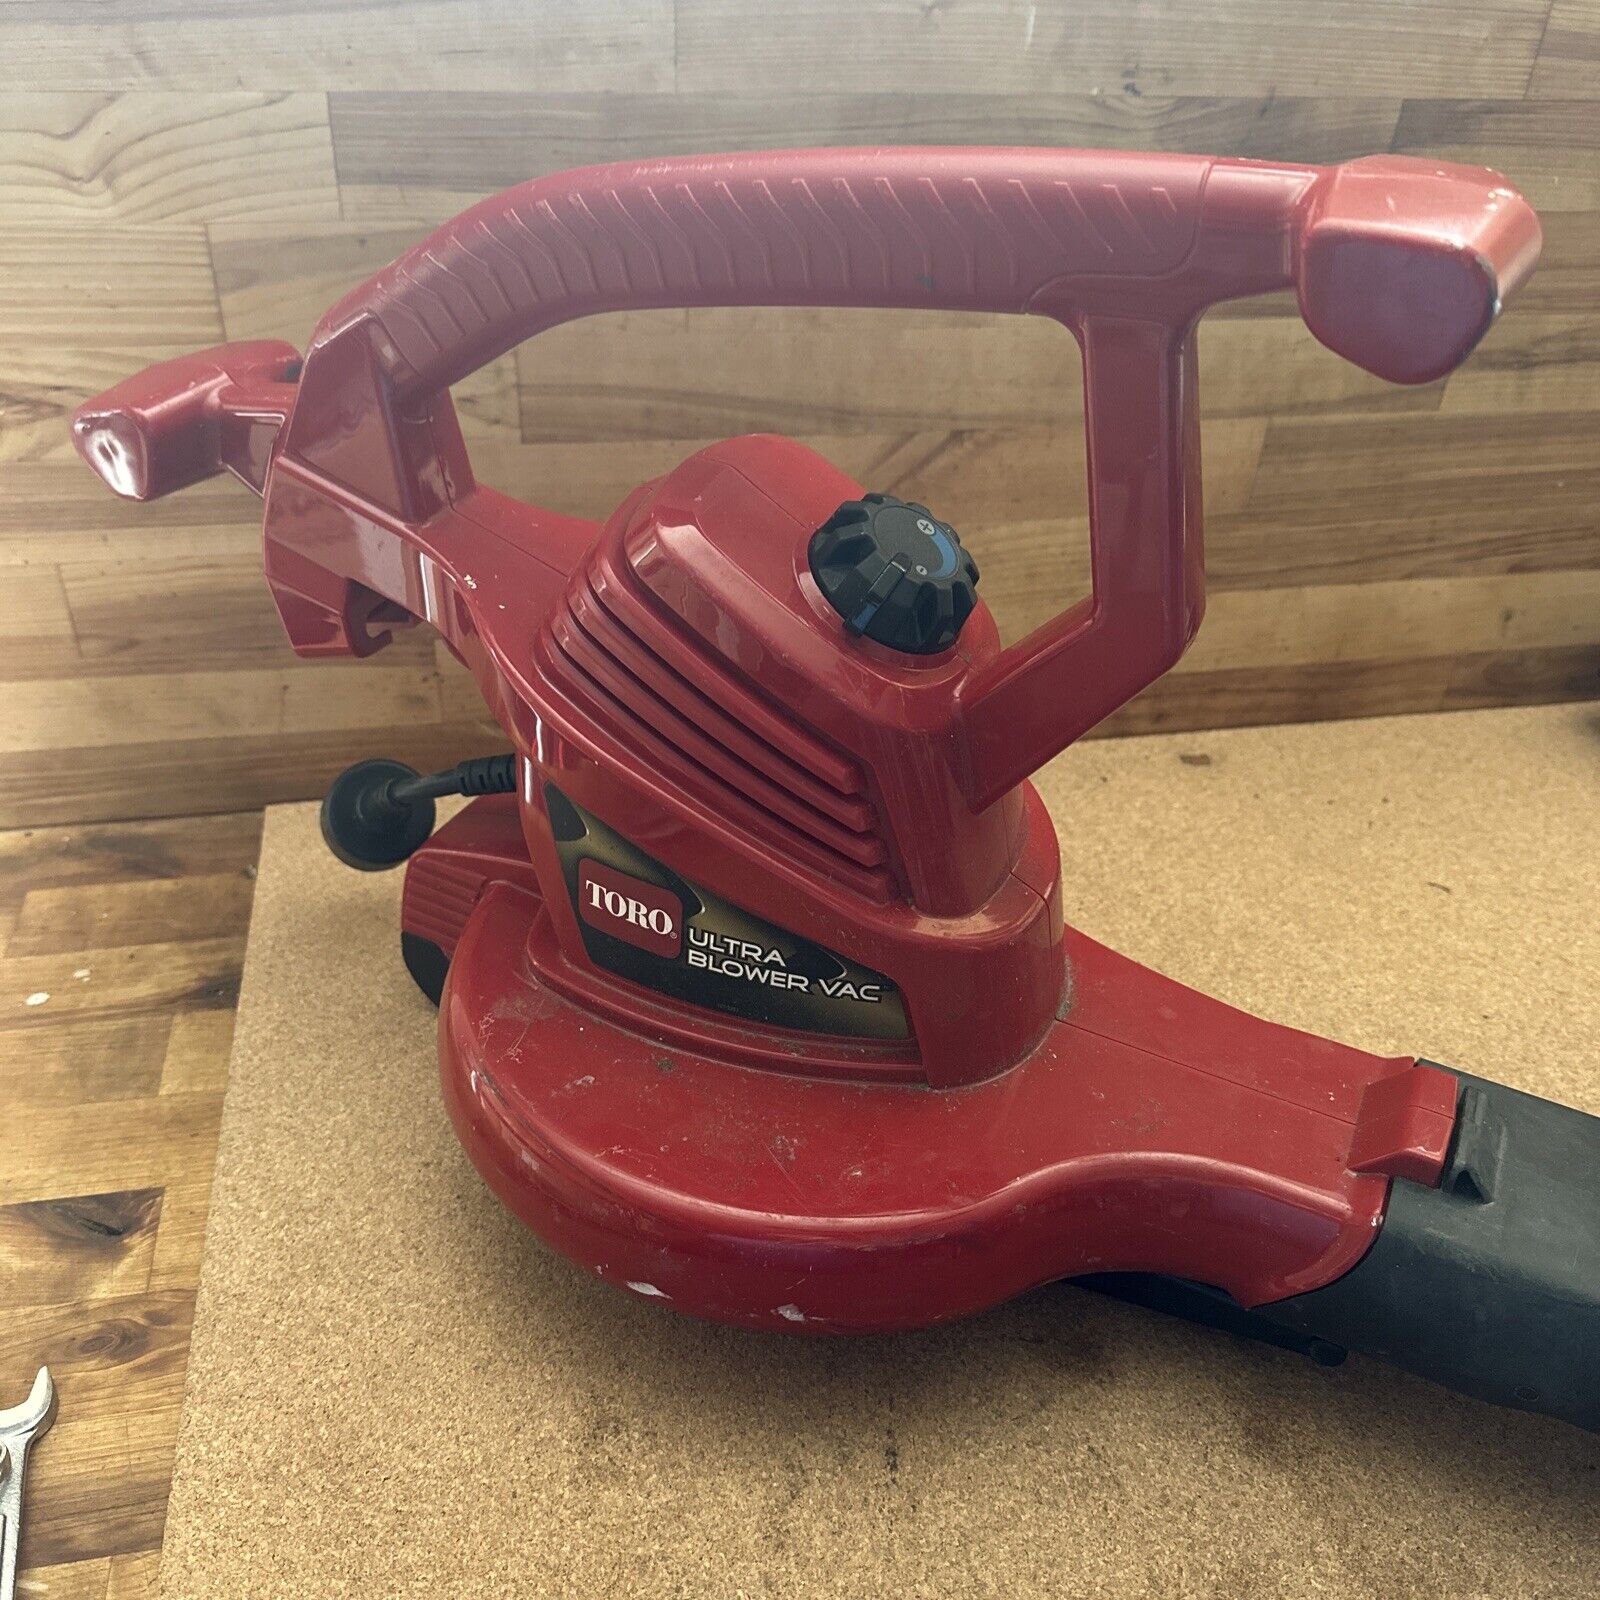 Toro 51619 Ultra Electric Blower Vacuum Mulcher- Red 260mph Corded Variable